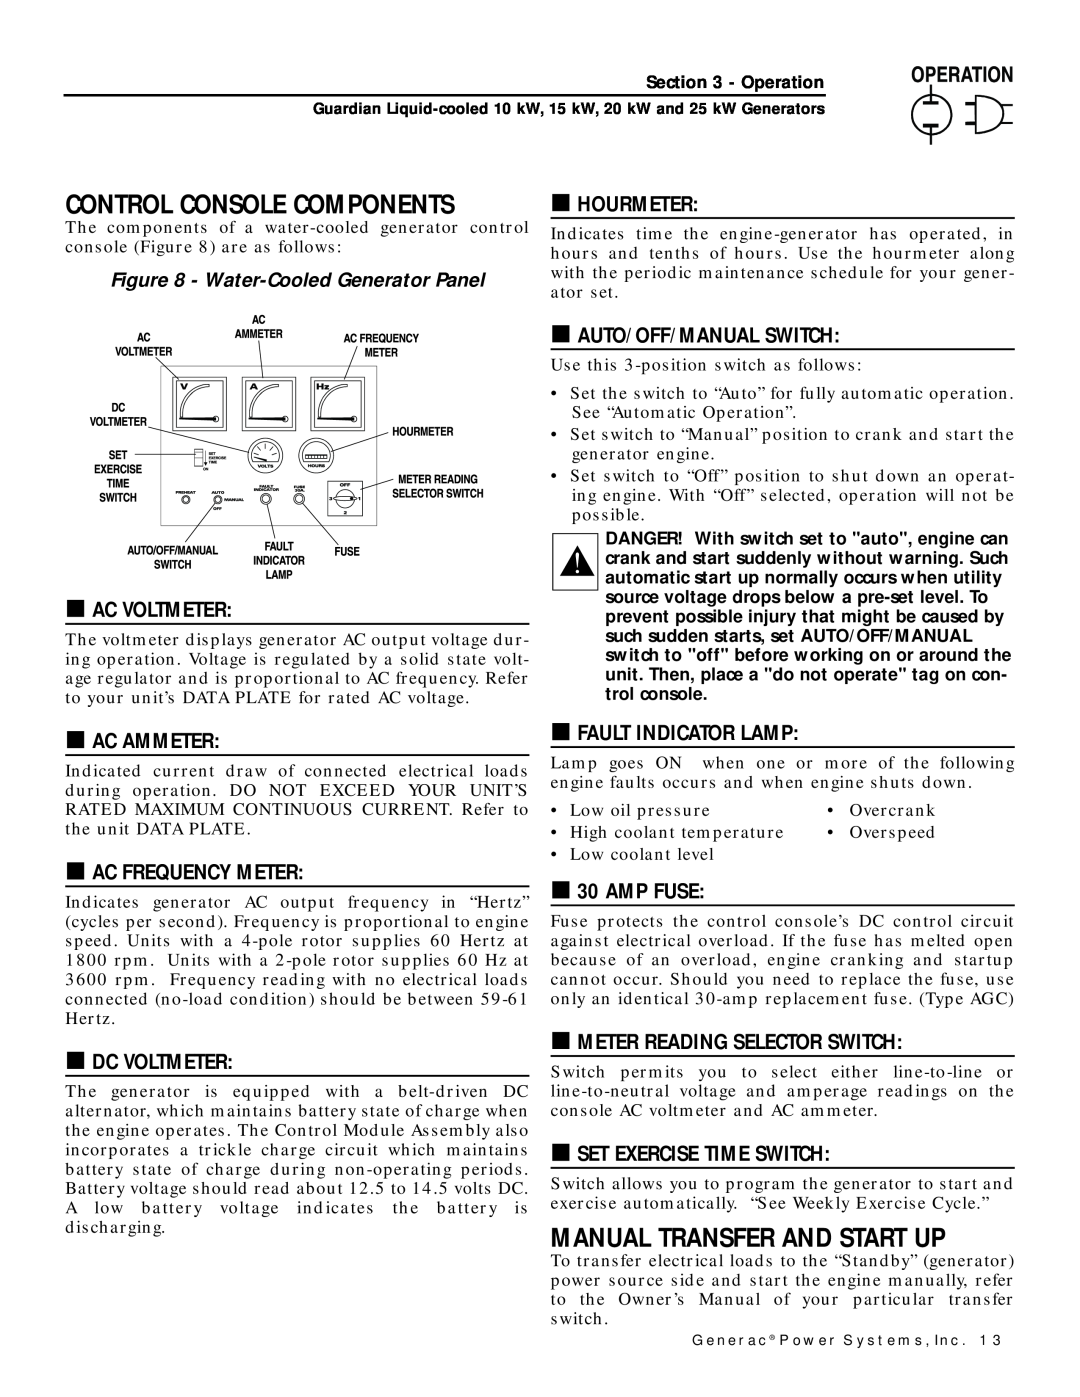 Generac Power Systems owner manual Control Console Components, Manual Transfer And Start Up 